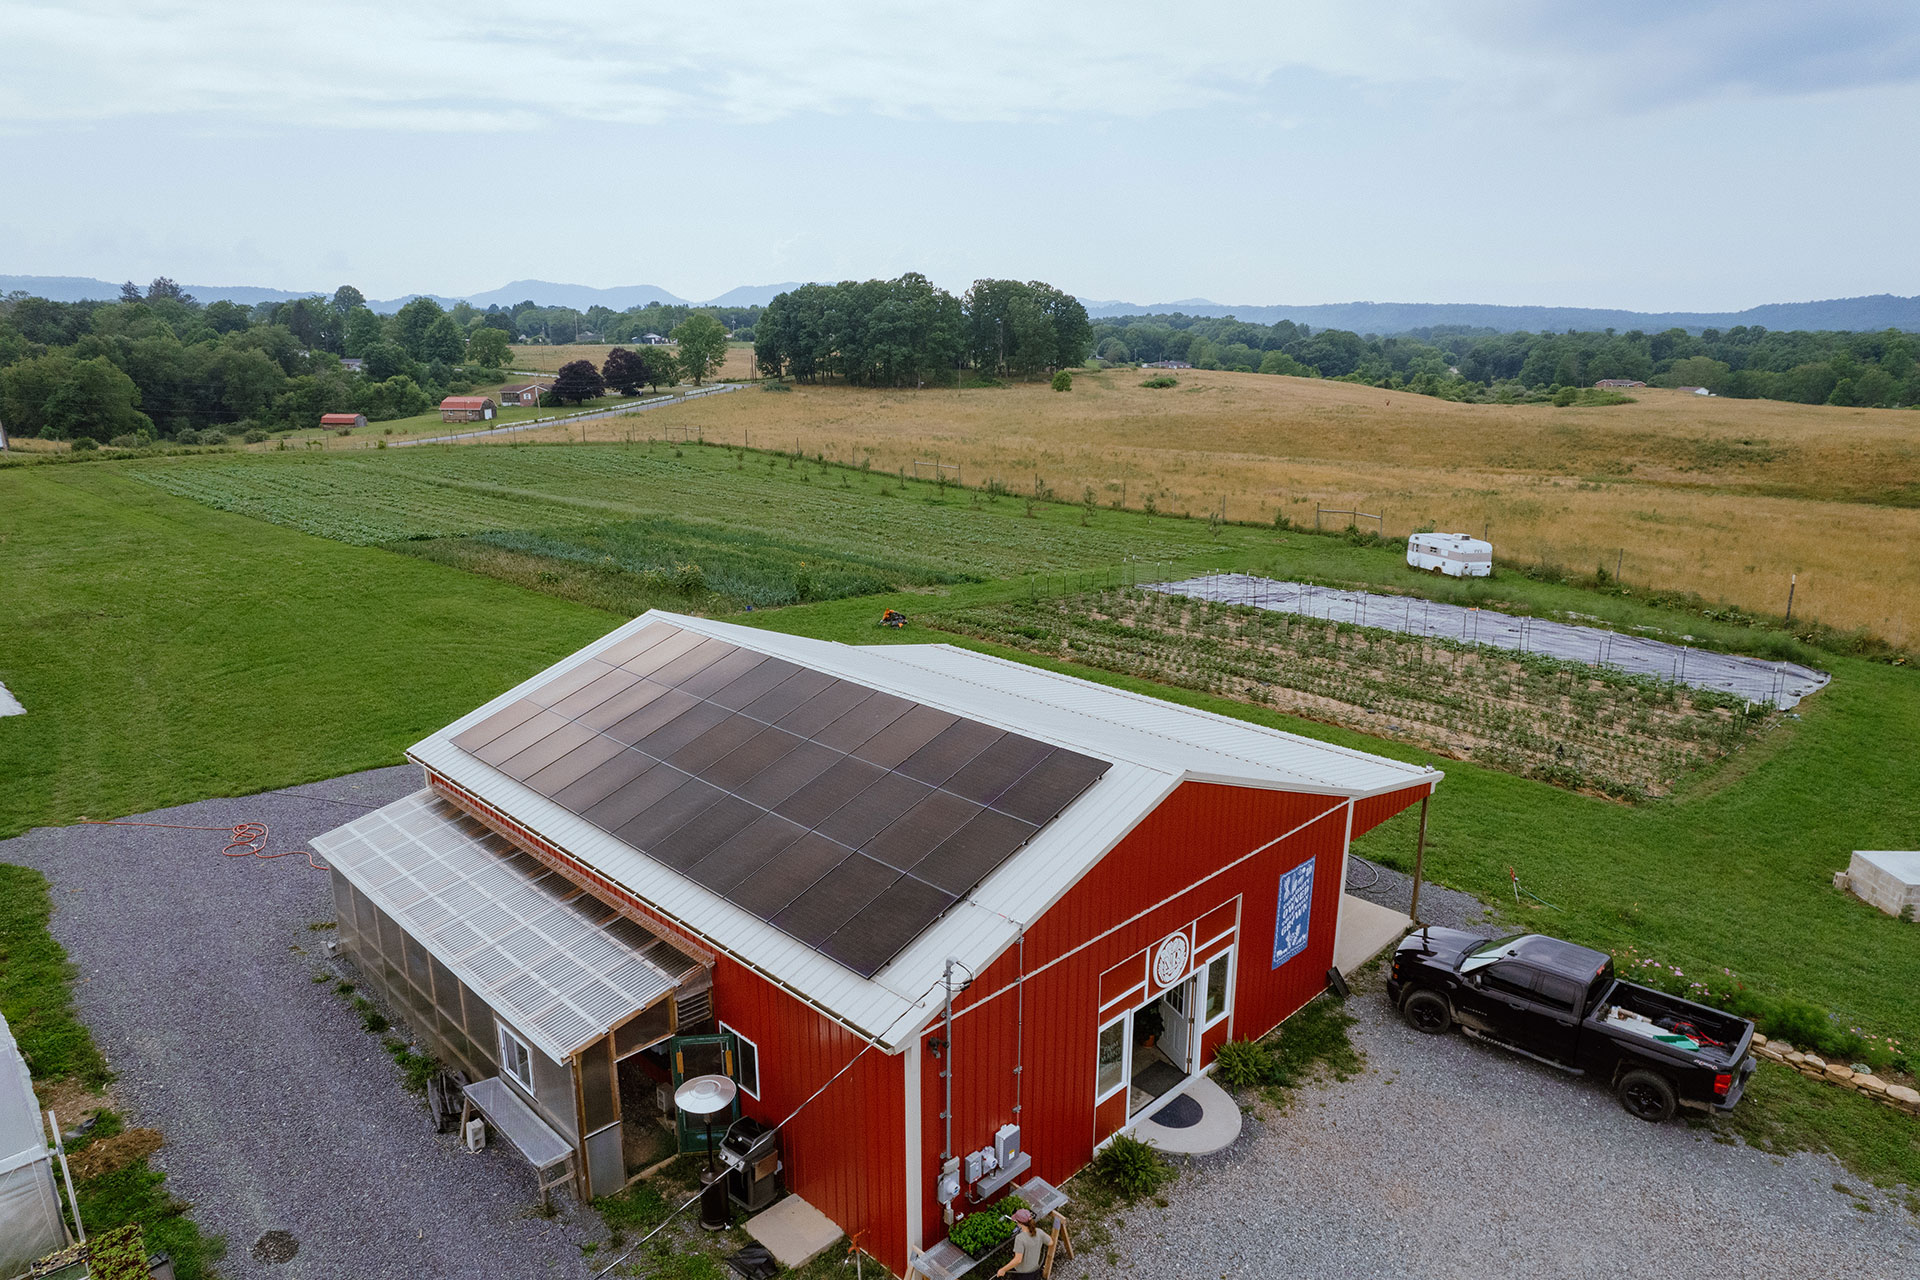 Aerial photo of a farm in rural Applachia. Barn has solar panels on top of the roof.